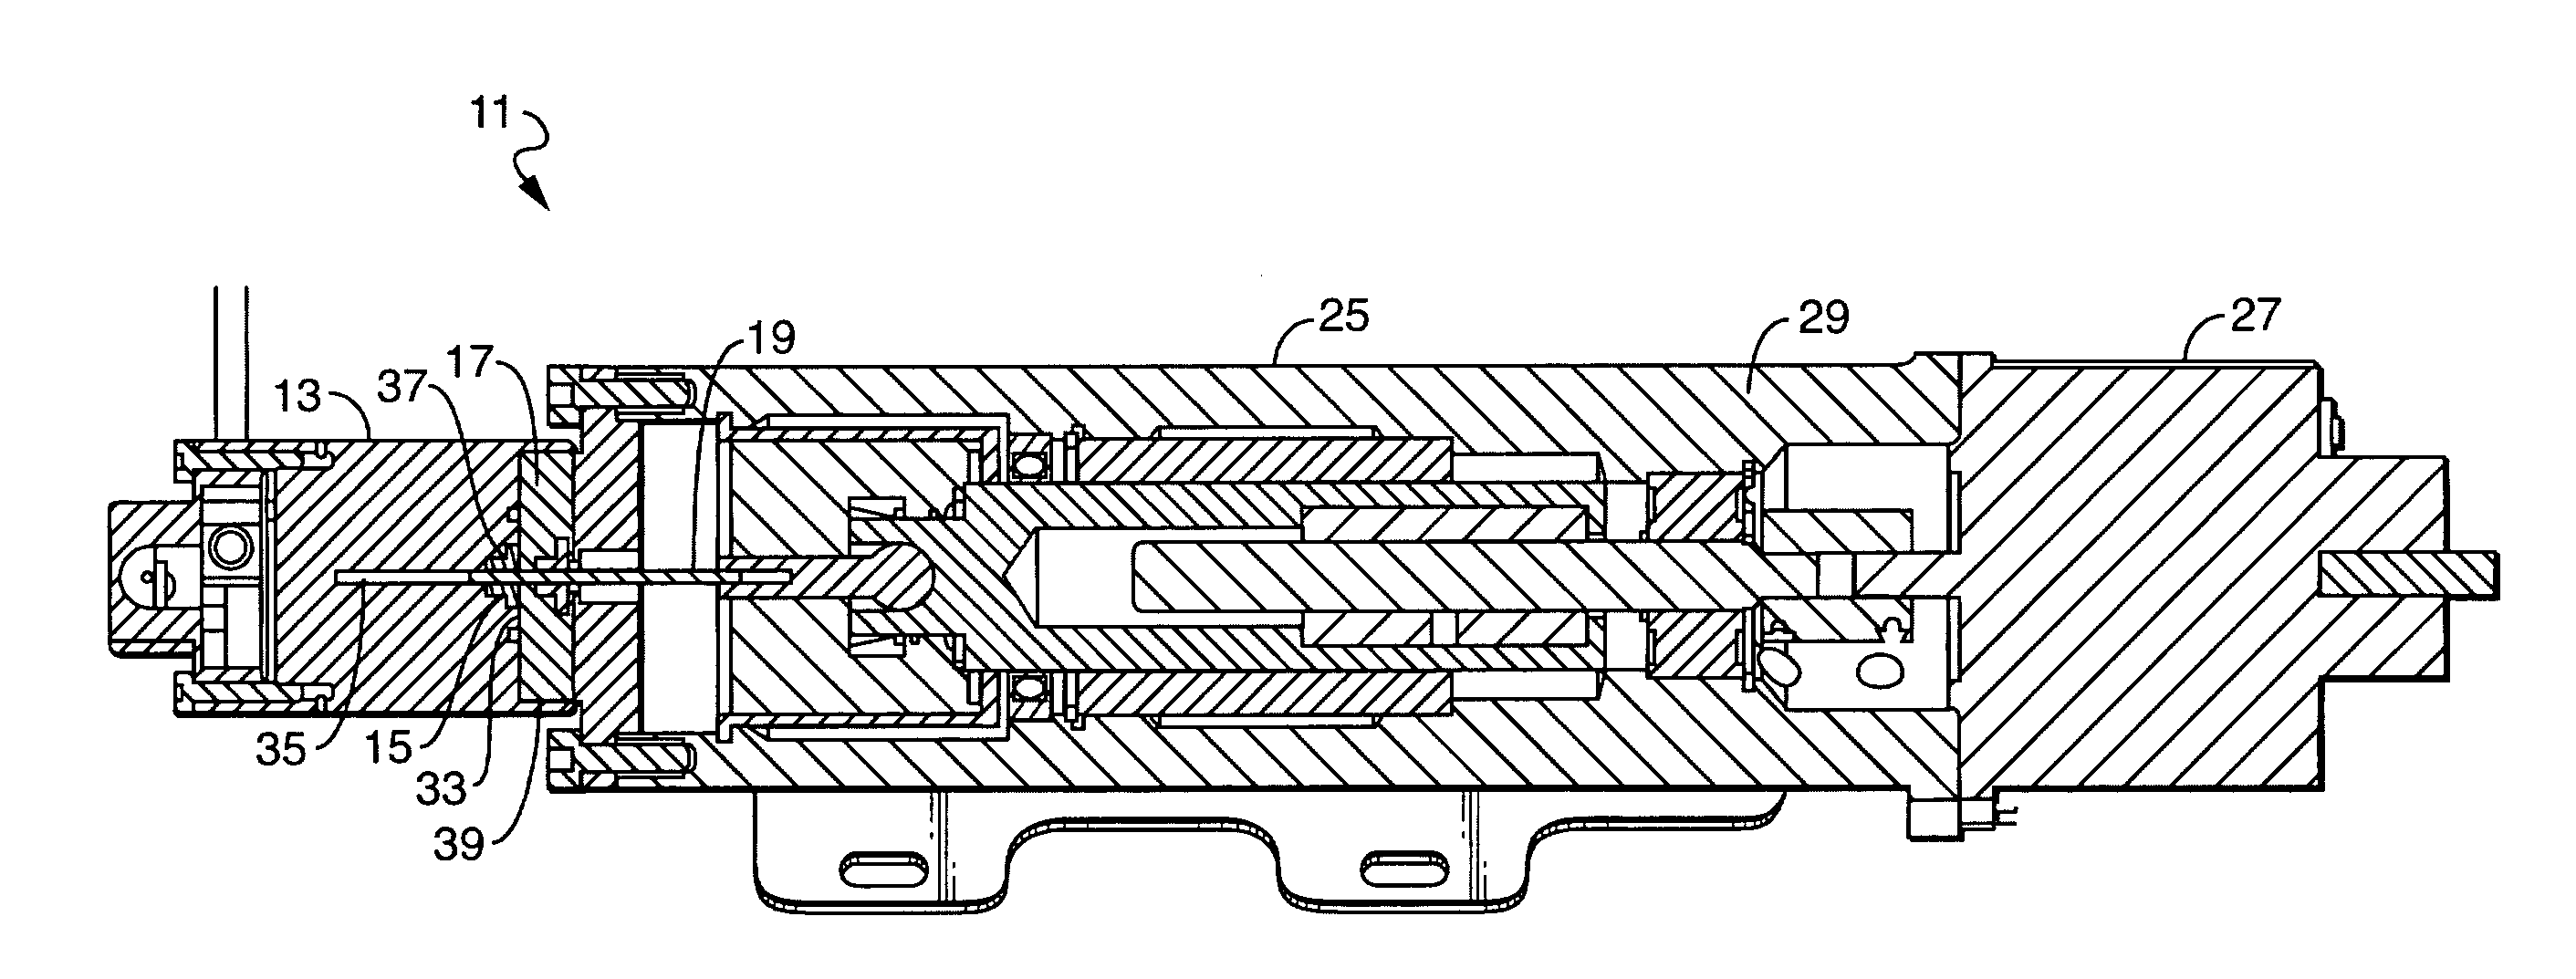 Defined Leak Path For High Pressure Seal